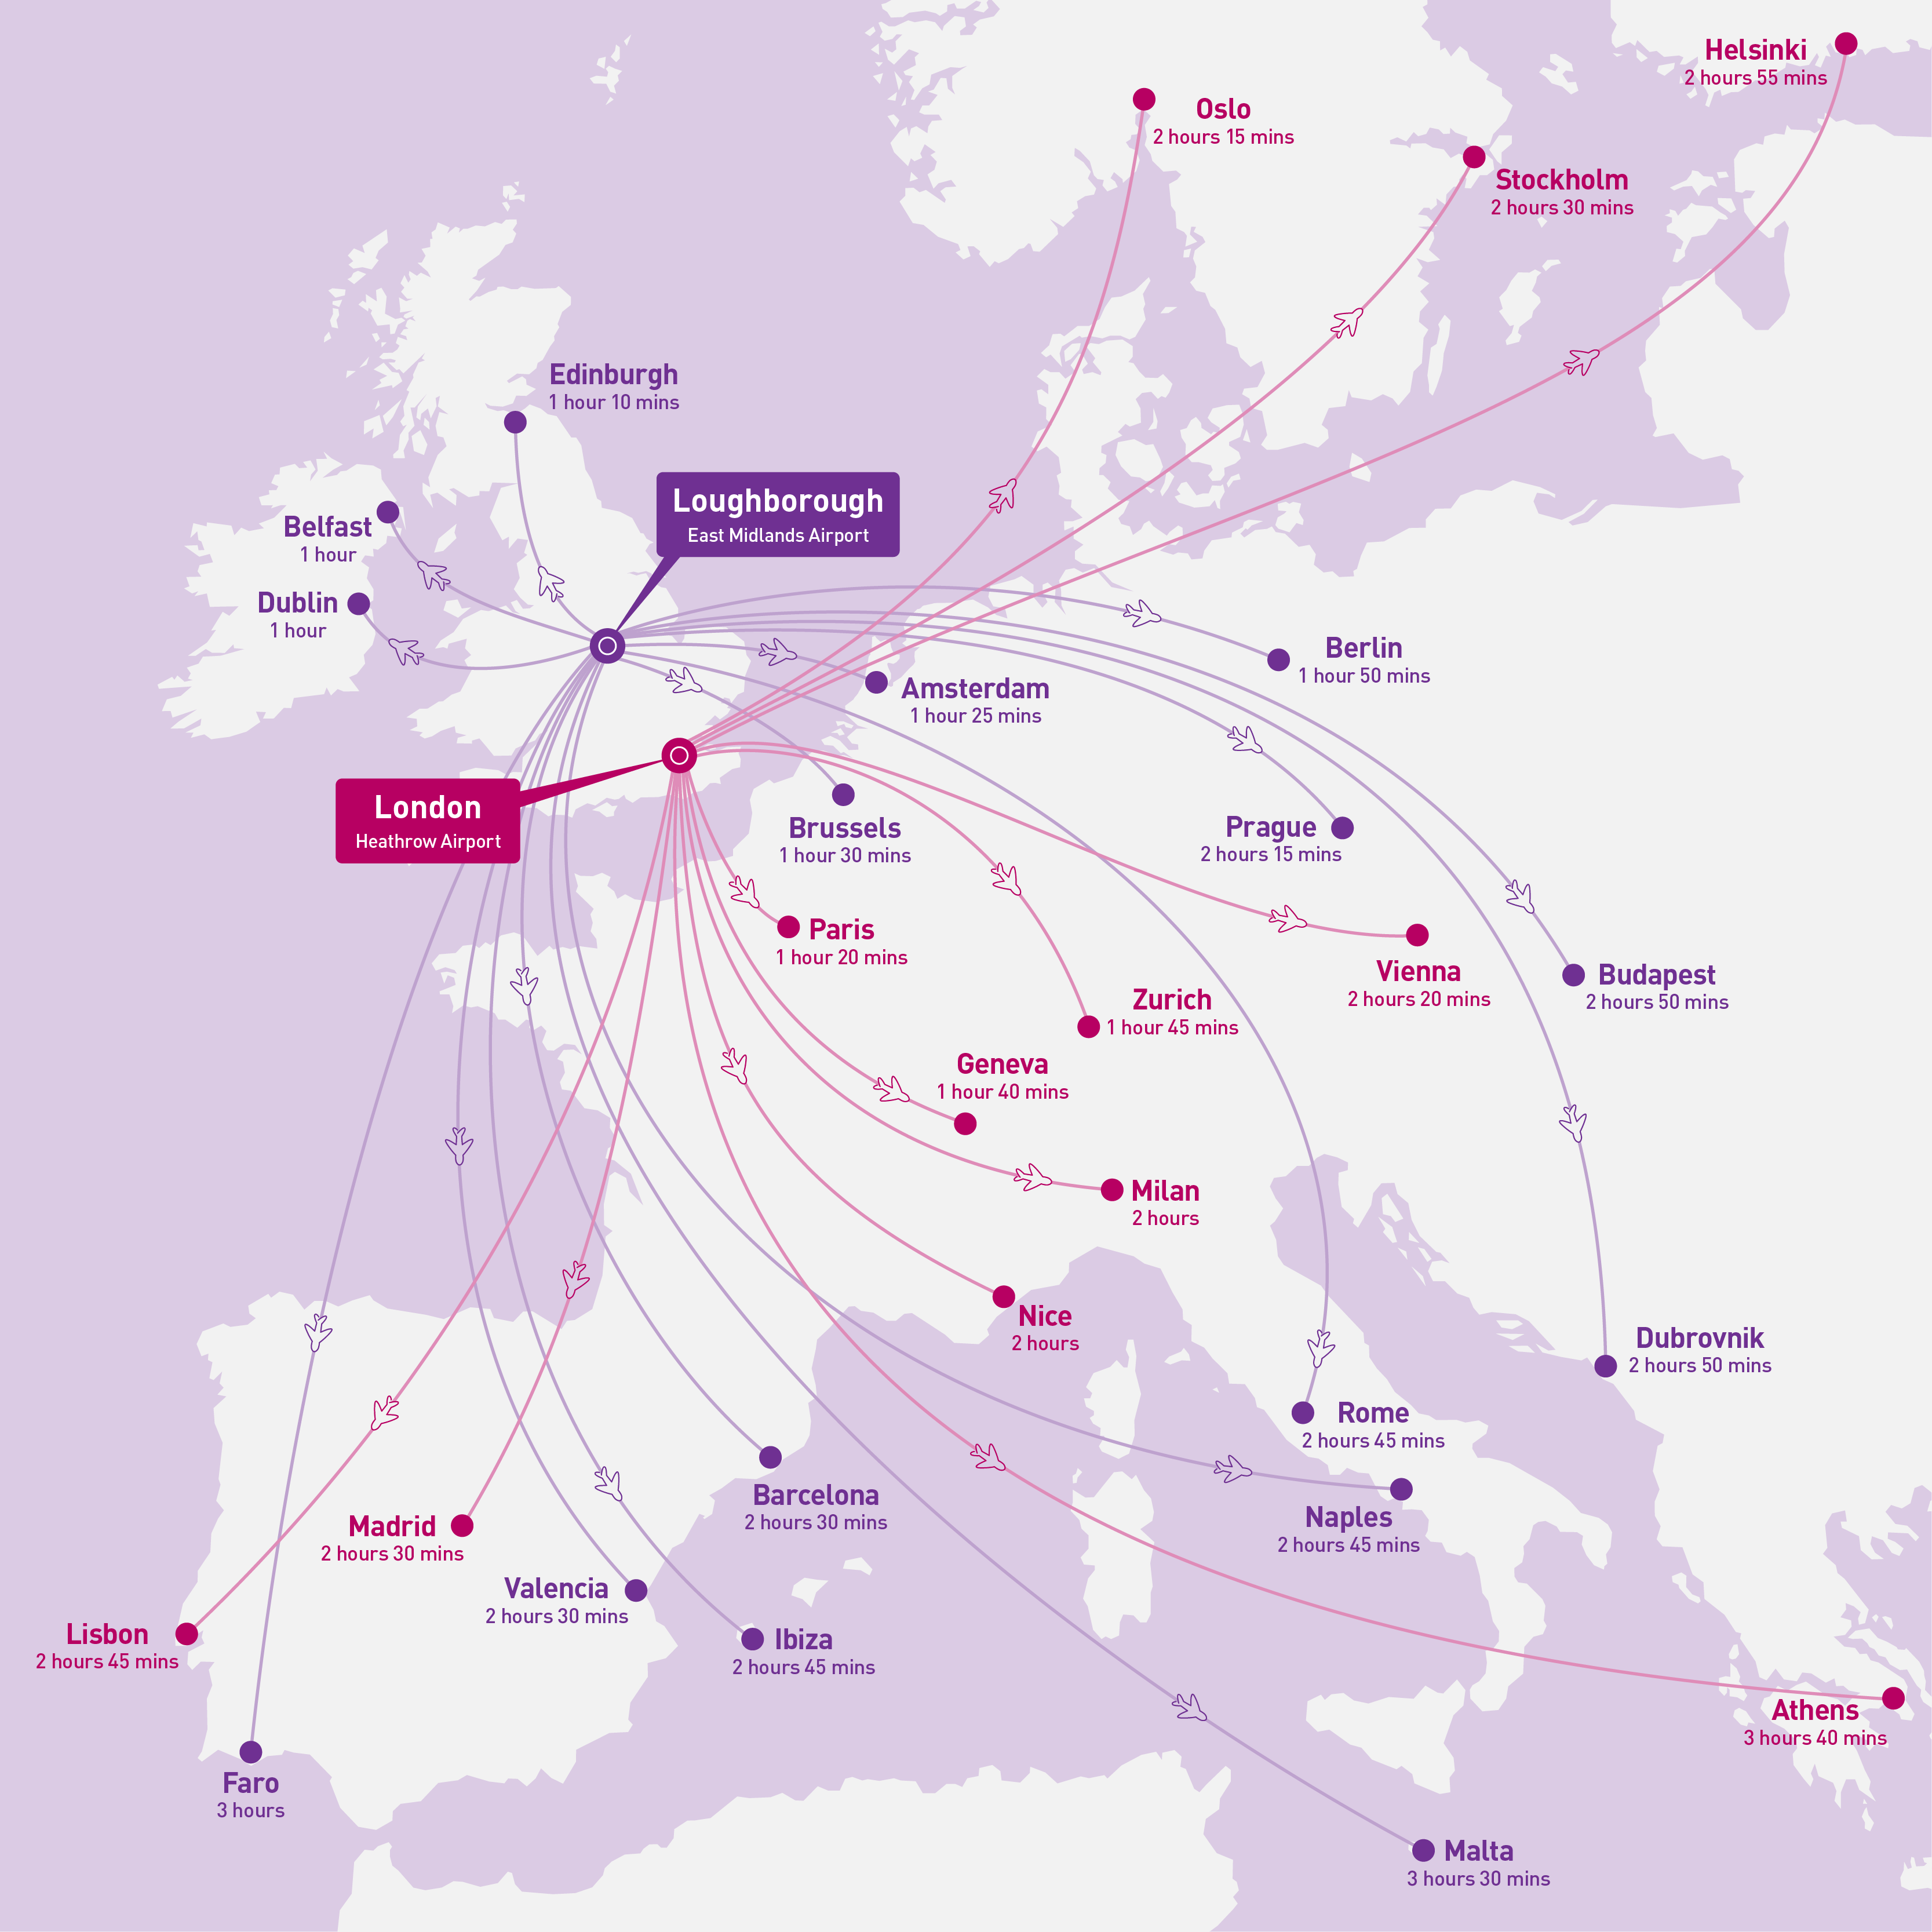 Map of the UK, showing flight times to EU destinations.